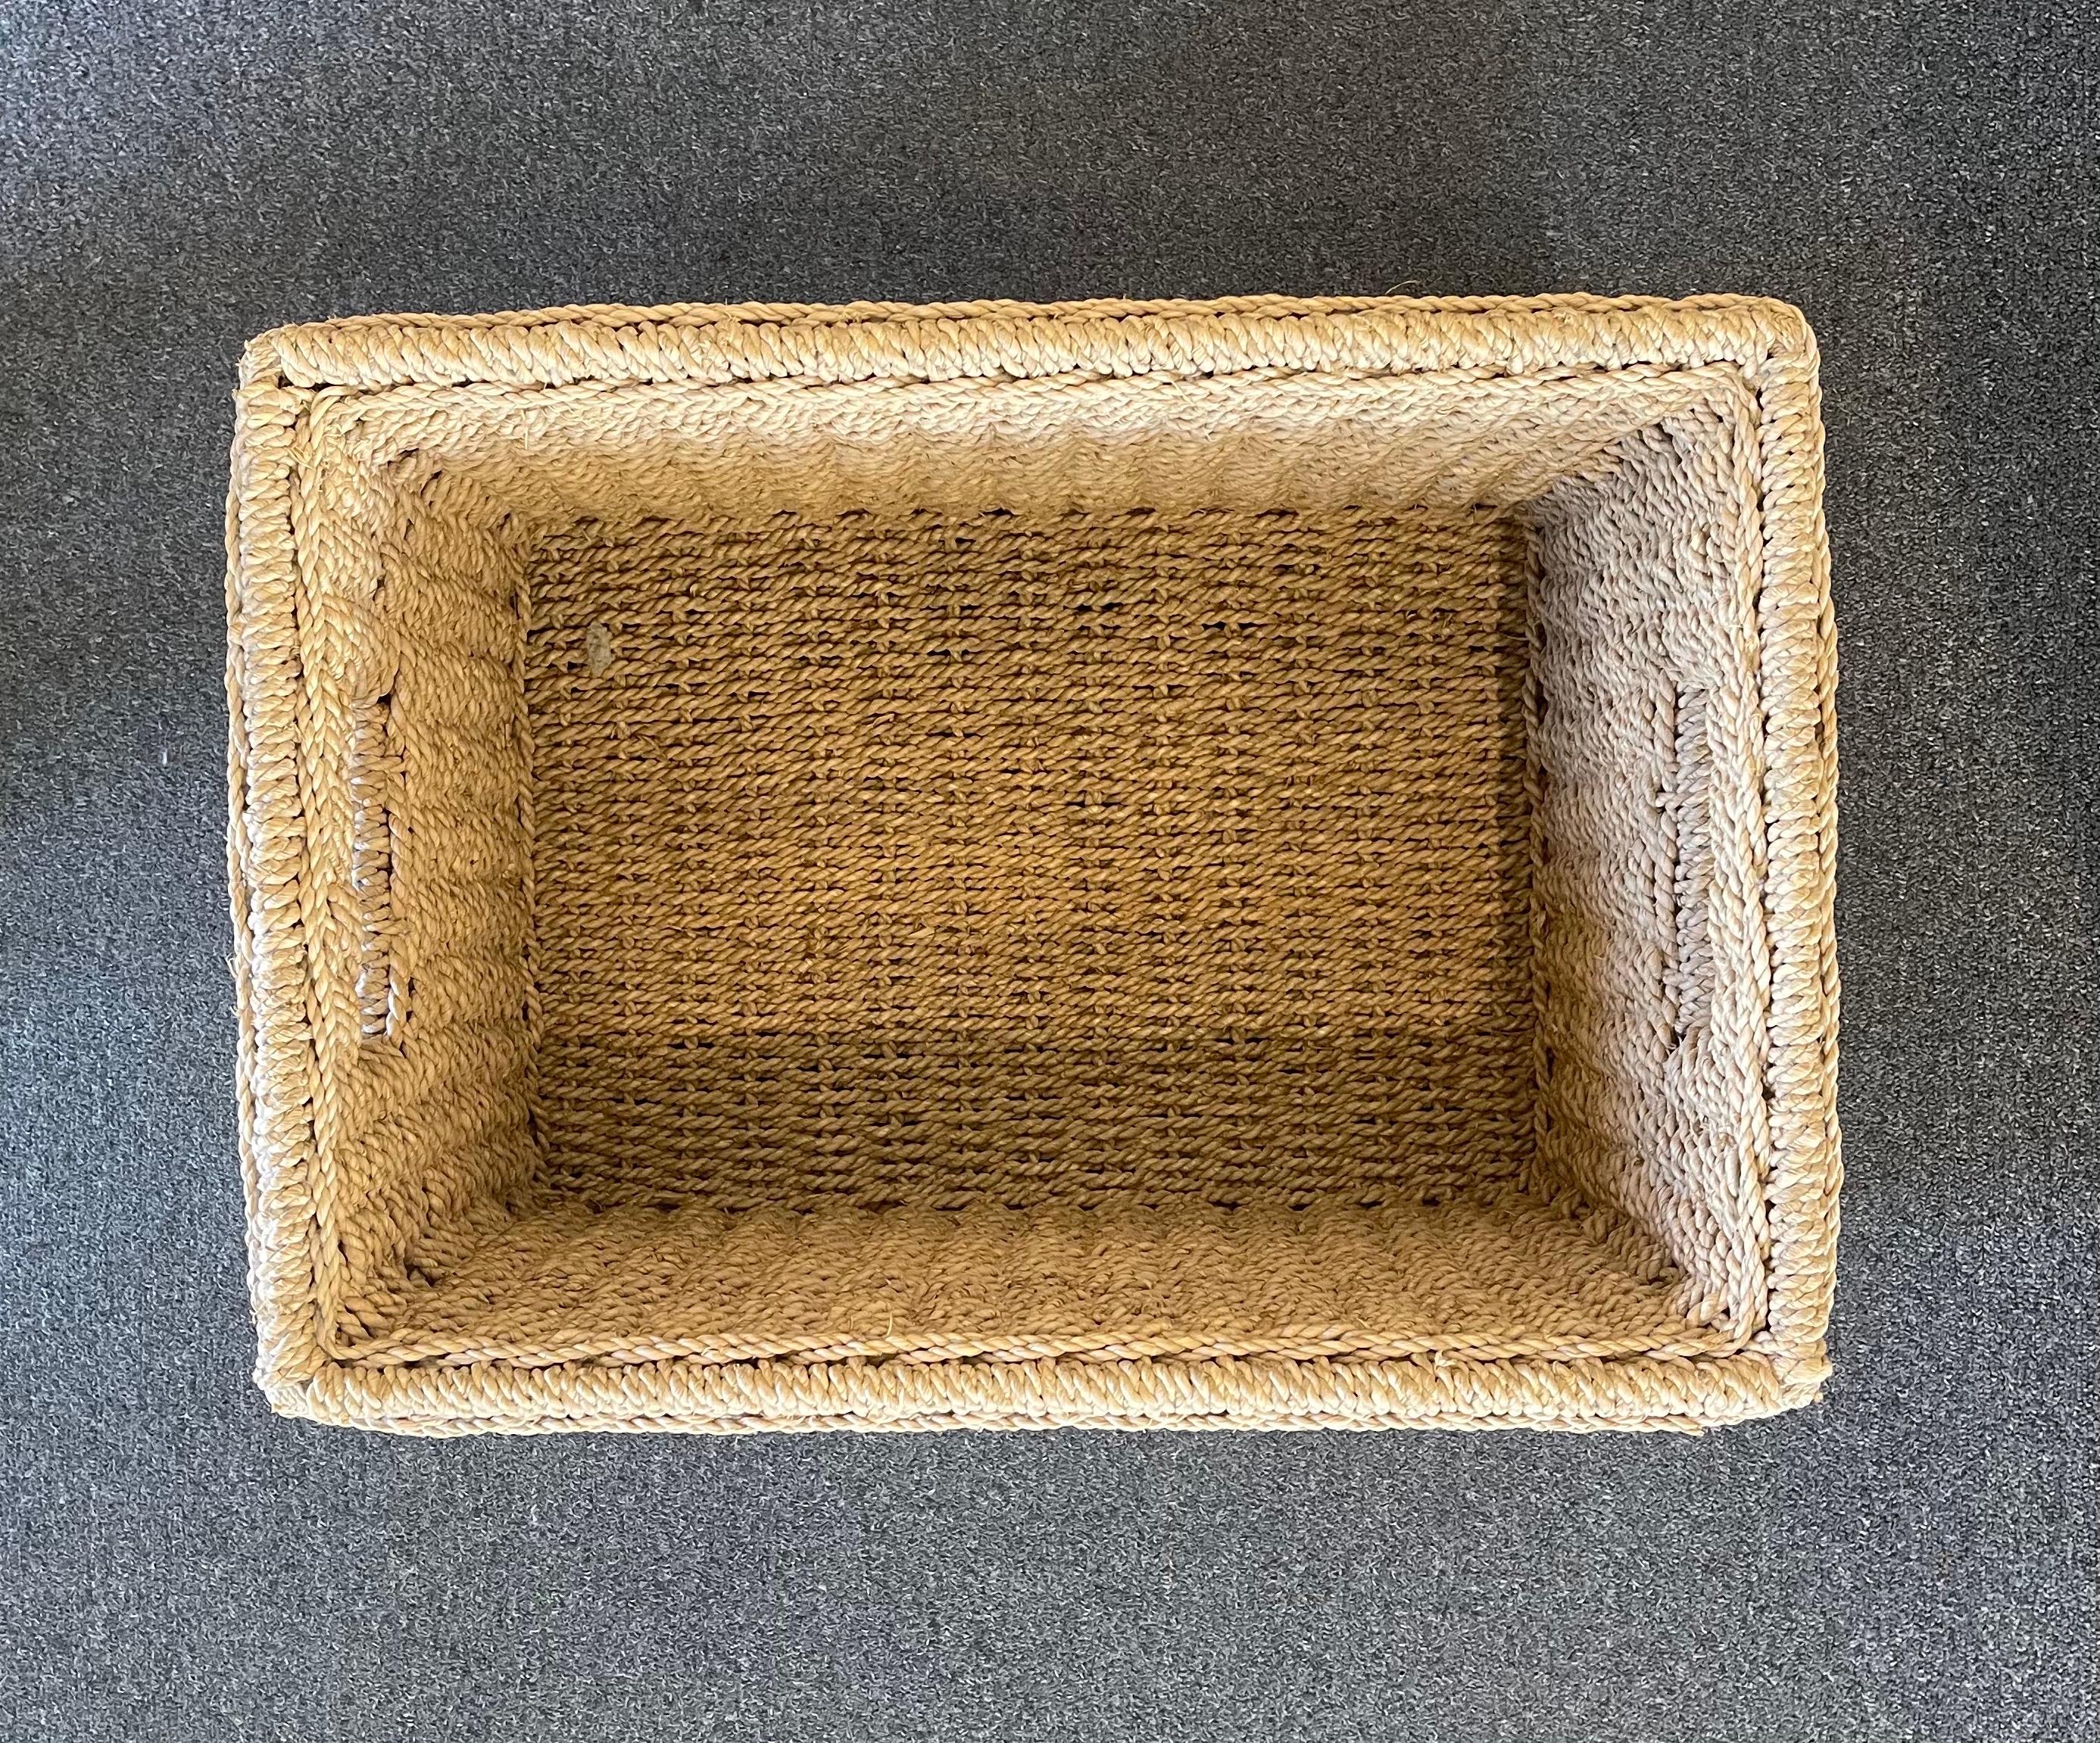 Hand-Woven Hand Woven Rope Basket / Magazine Holder by Gunther Lambert For Sale